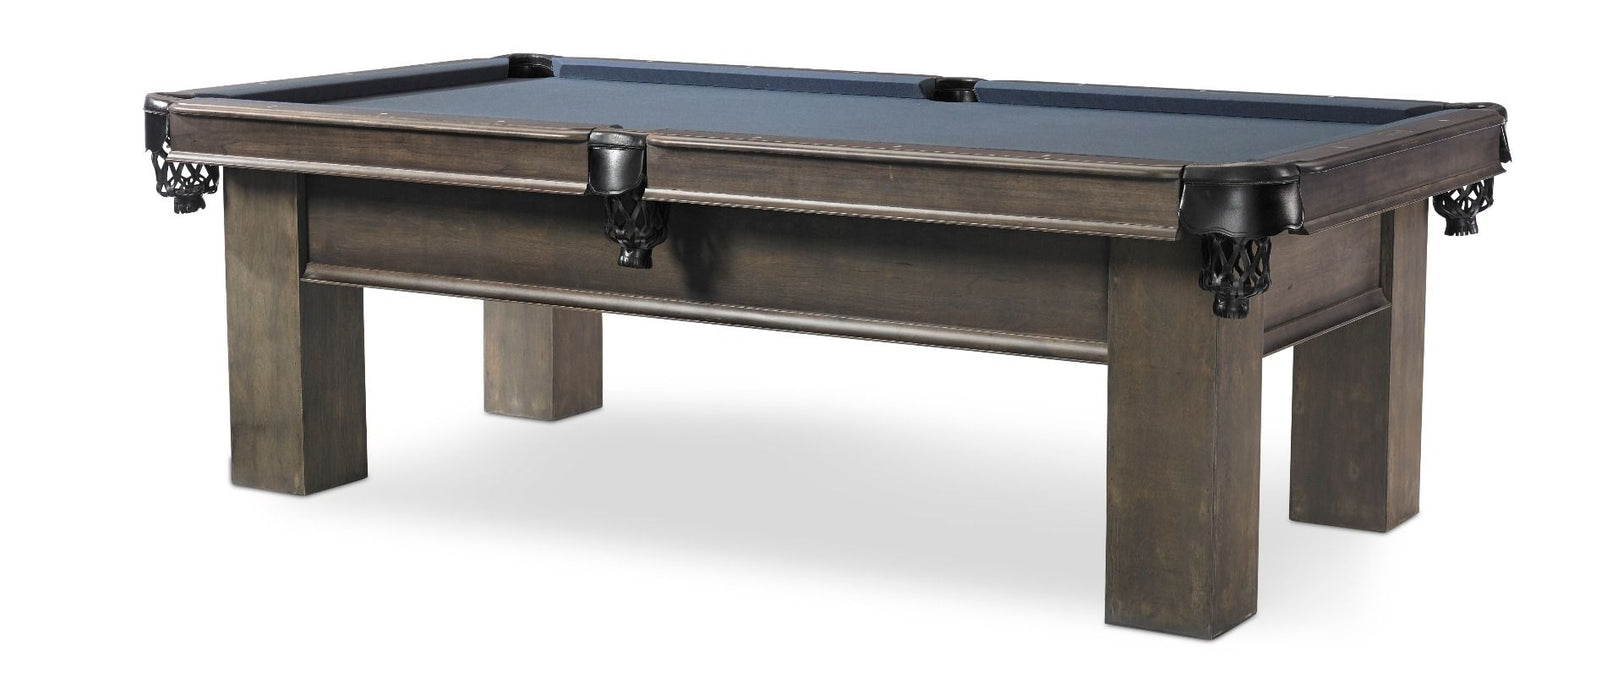 Plank and Hide Elias Pool Table stock 2